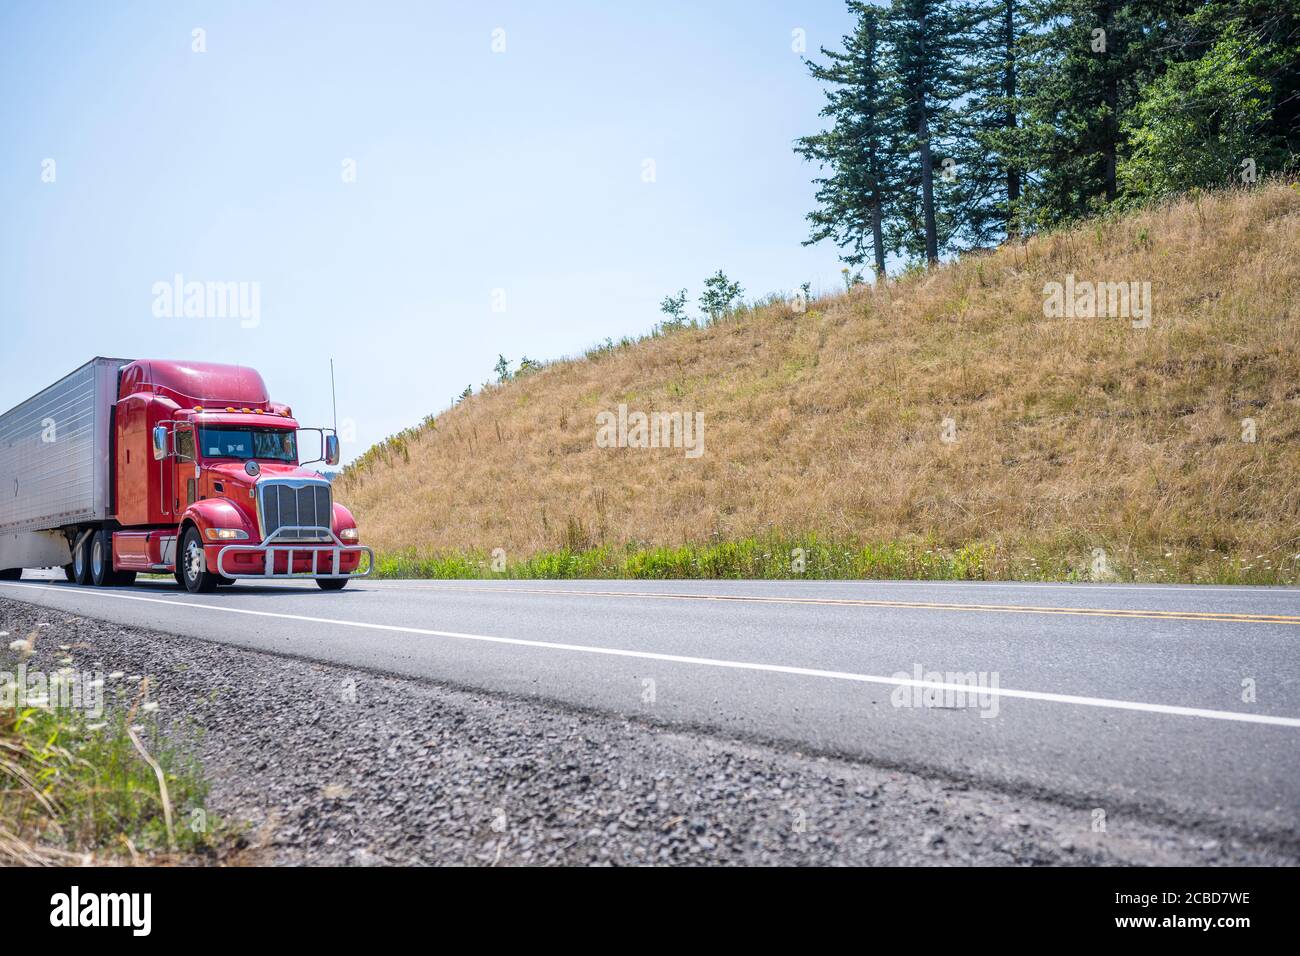 Loaded industrial red big rig semi truck with grille guard transporting frozen commercial cargo in long refrigerator semi trailer running on the windi Stock Photo